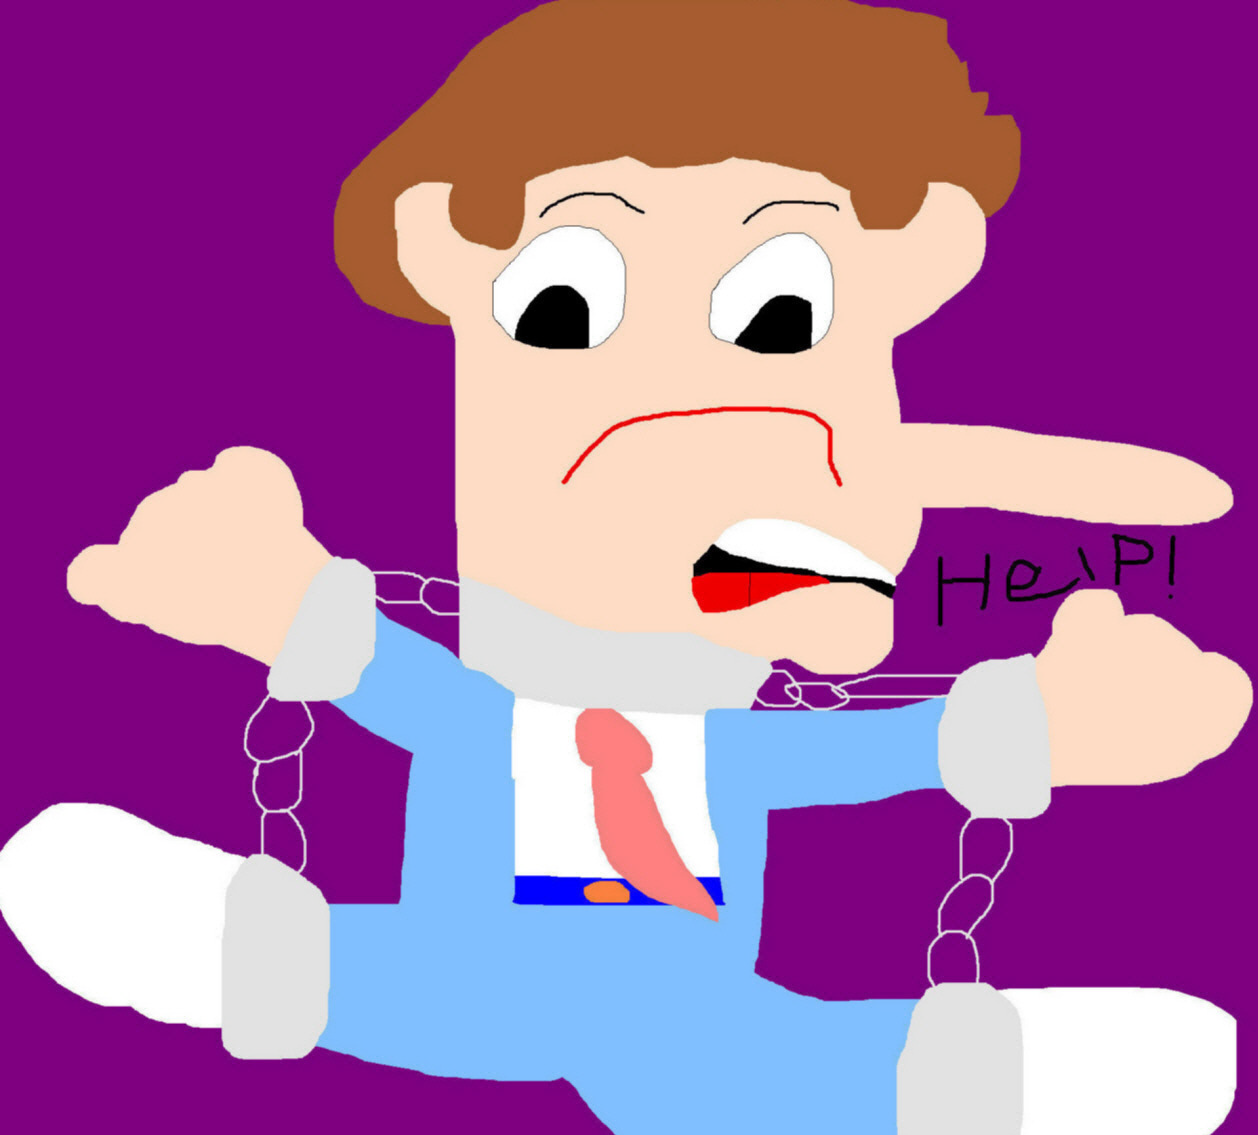 Poor Norman Normanmeyer Caught In A Trap Again Ms Paint^0^ by Falconlobo